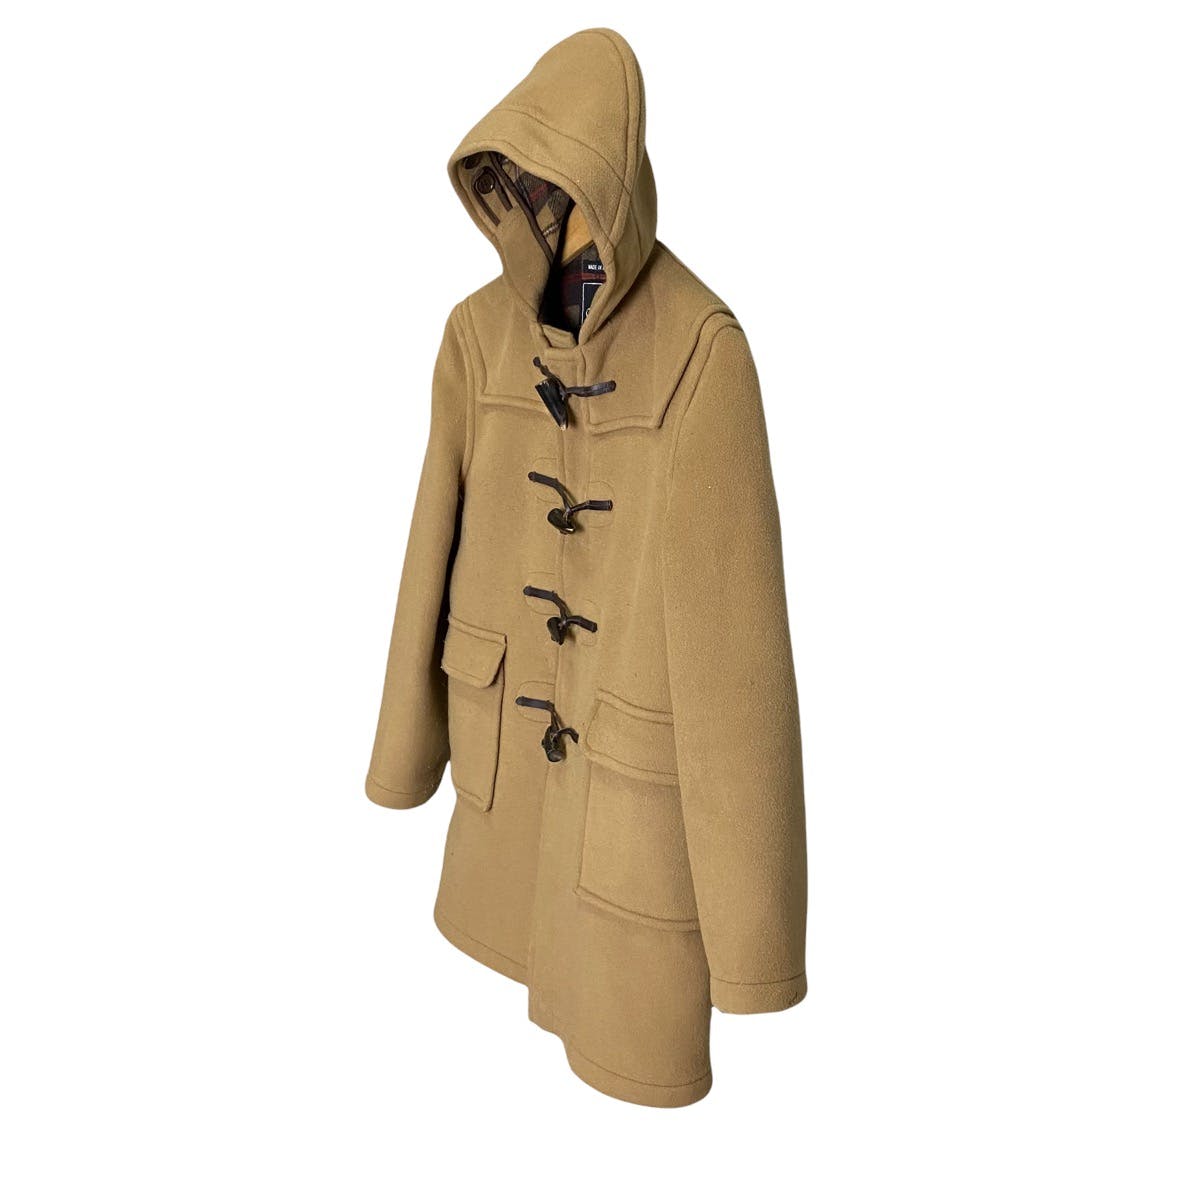 Gloverall morris duffle wool parka hoodie made in england - 4